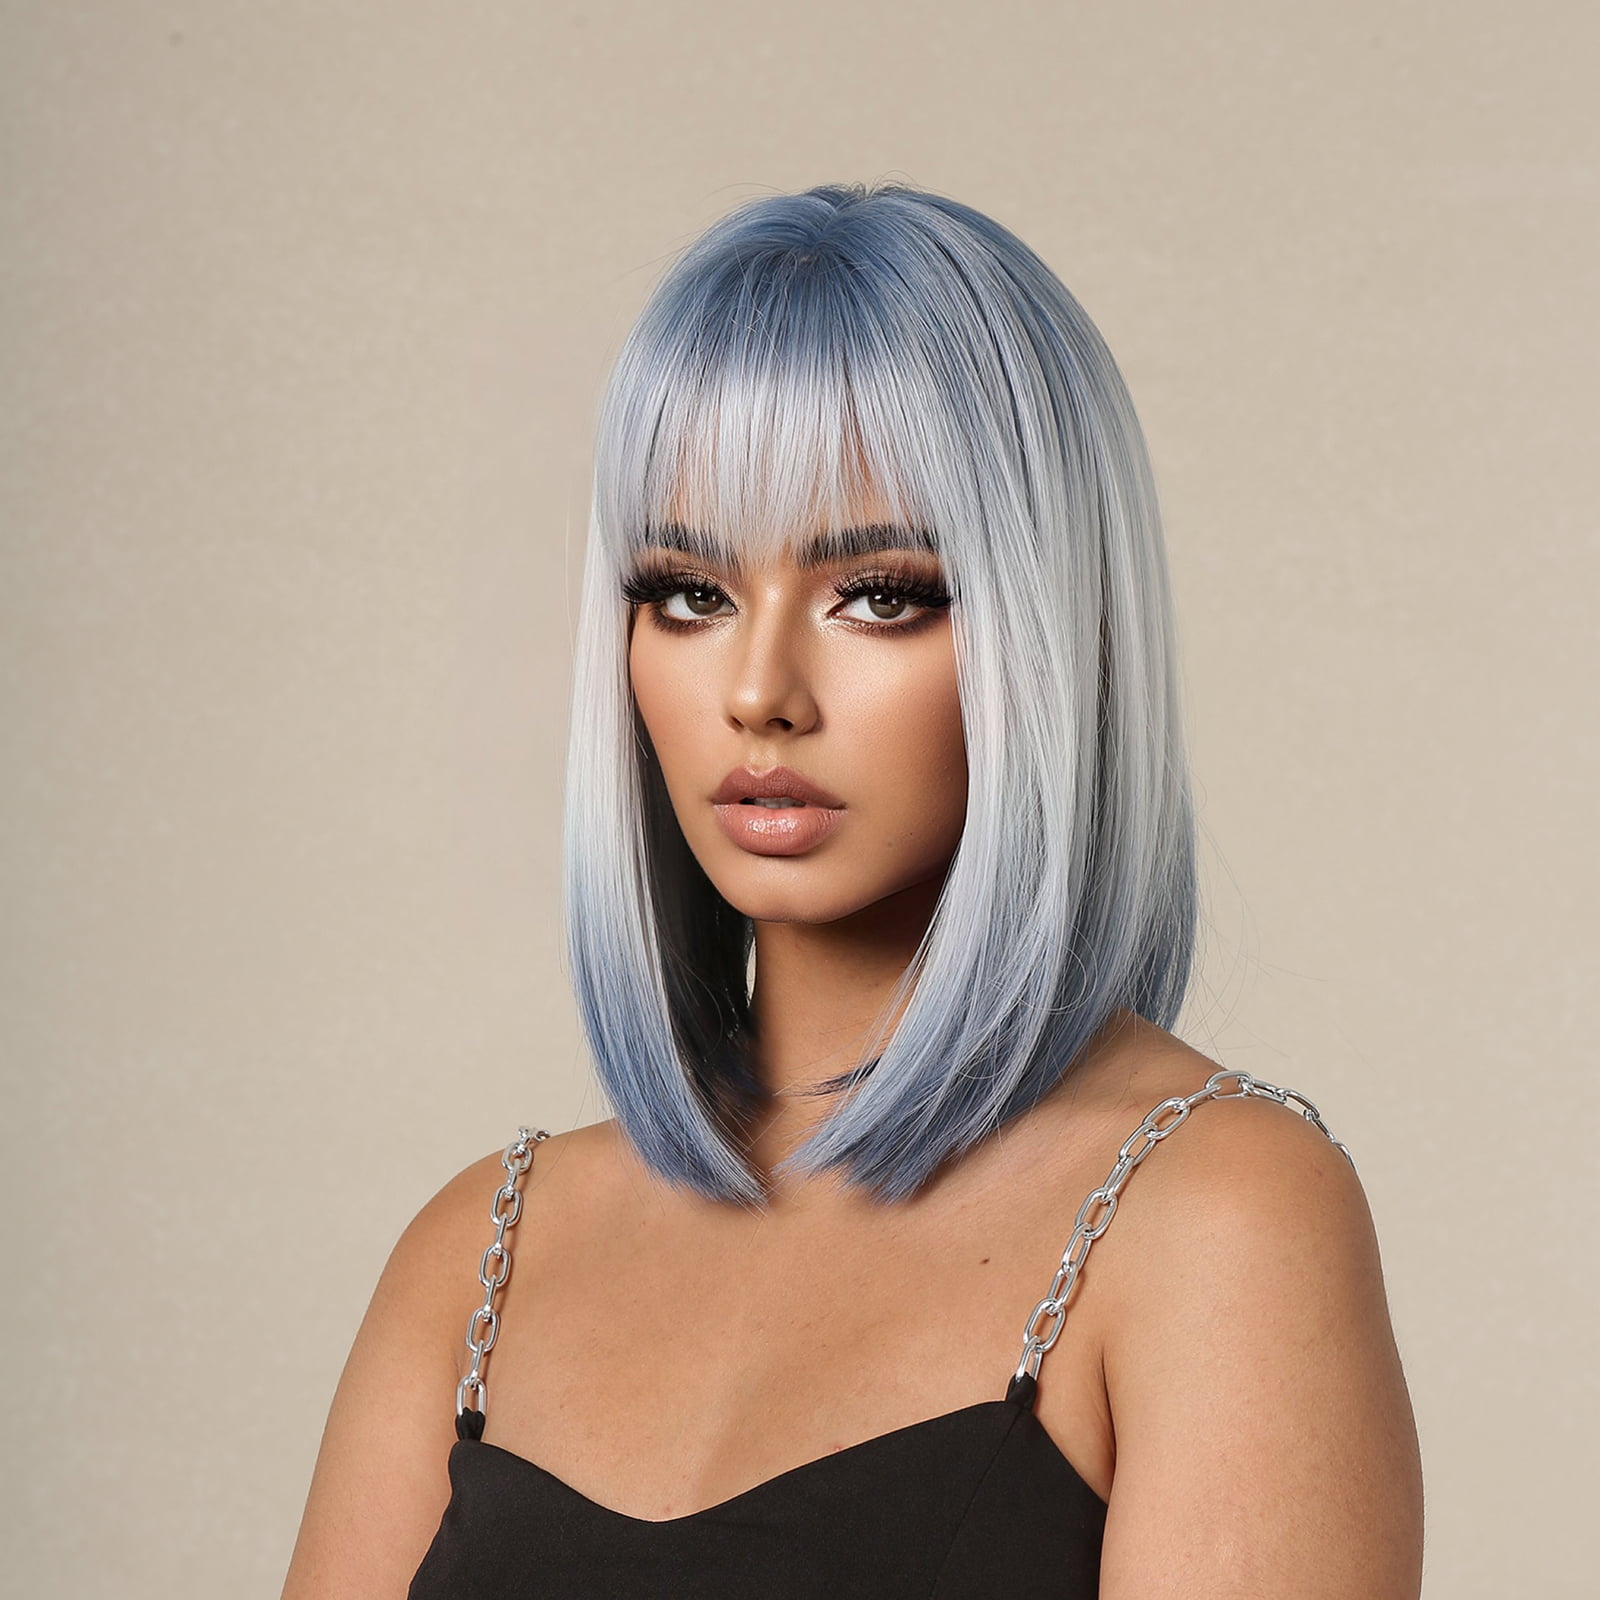 A synthetic wig in silver brown with short straight hair, styled and ready to go